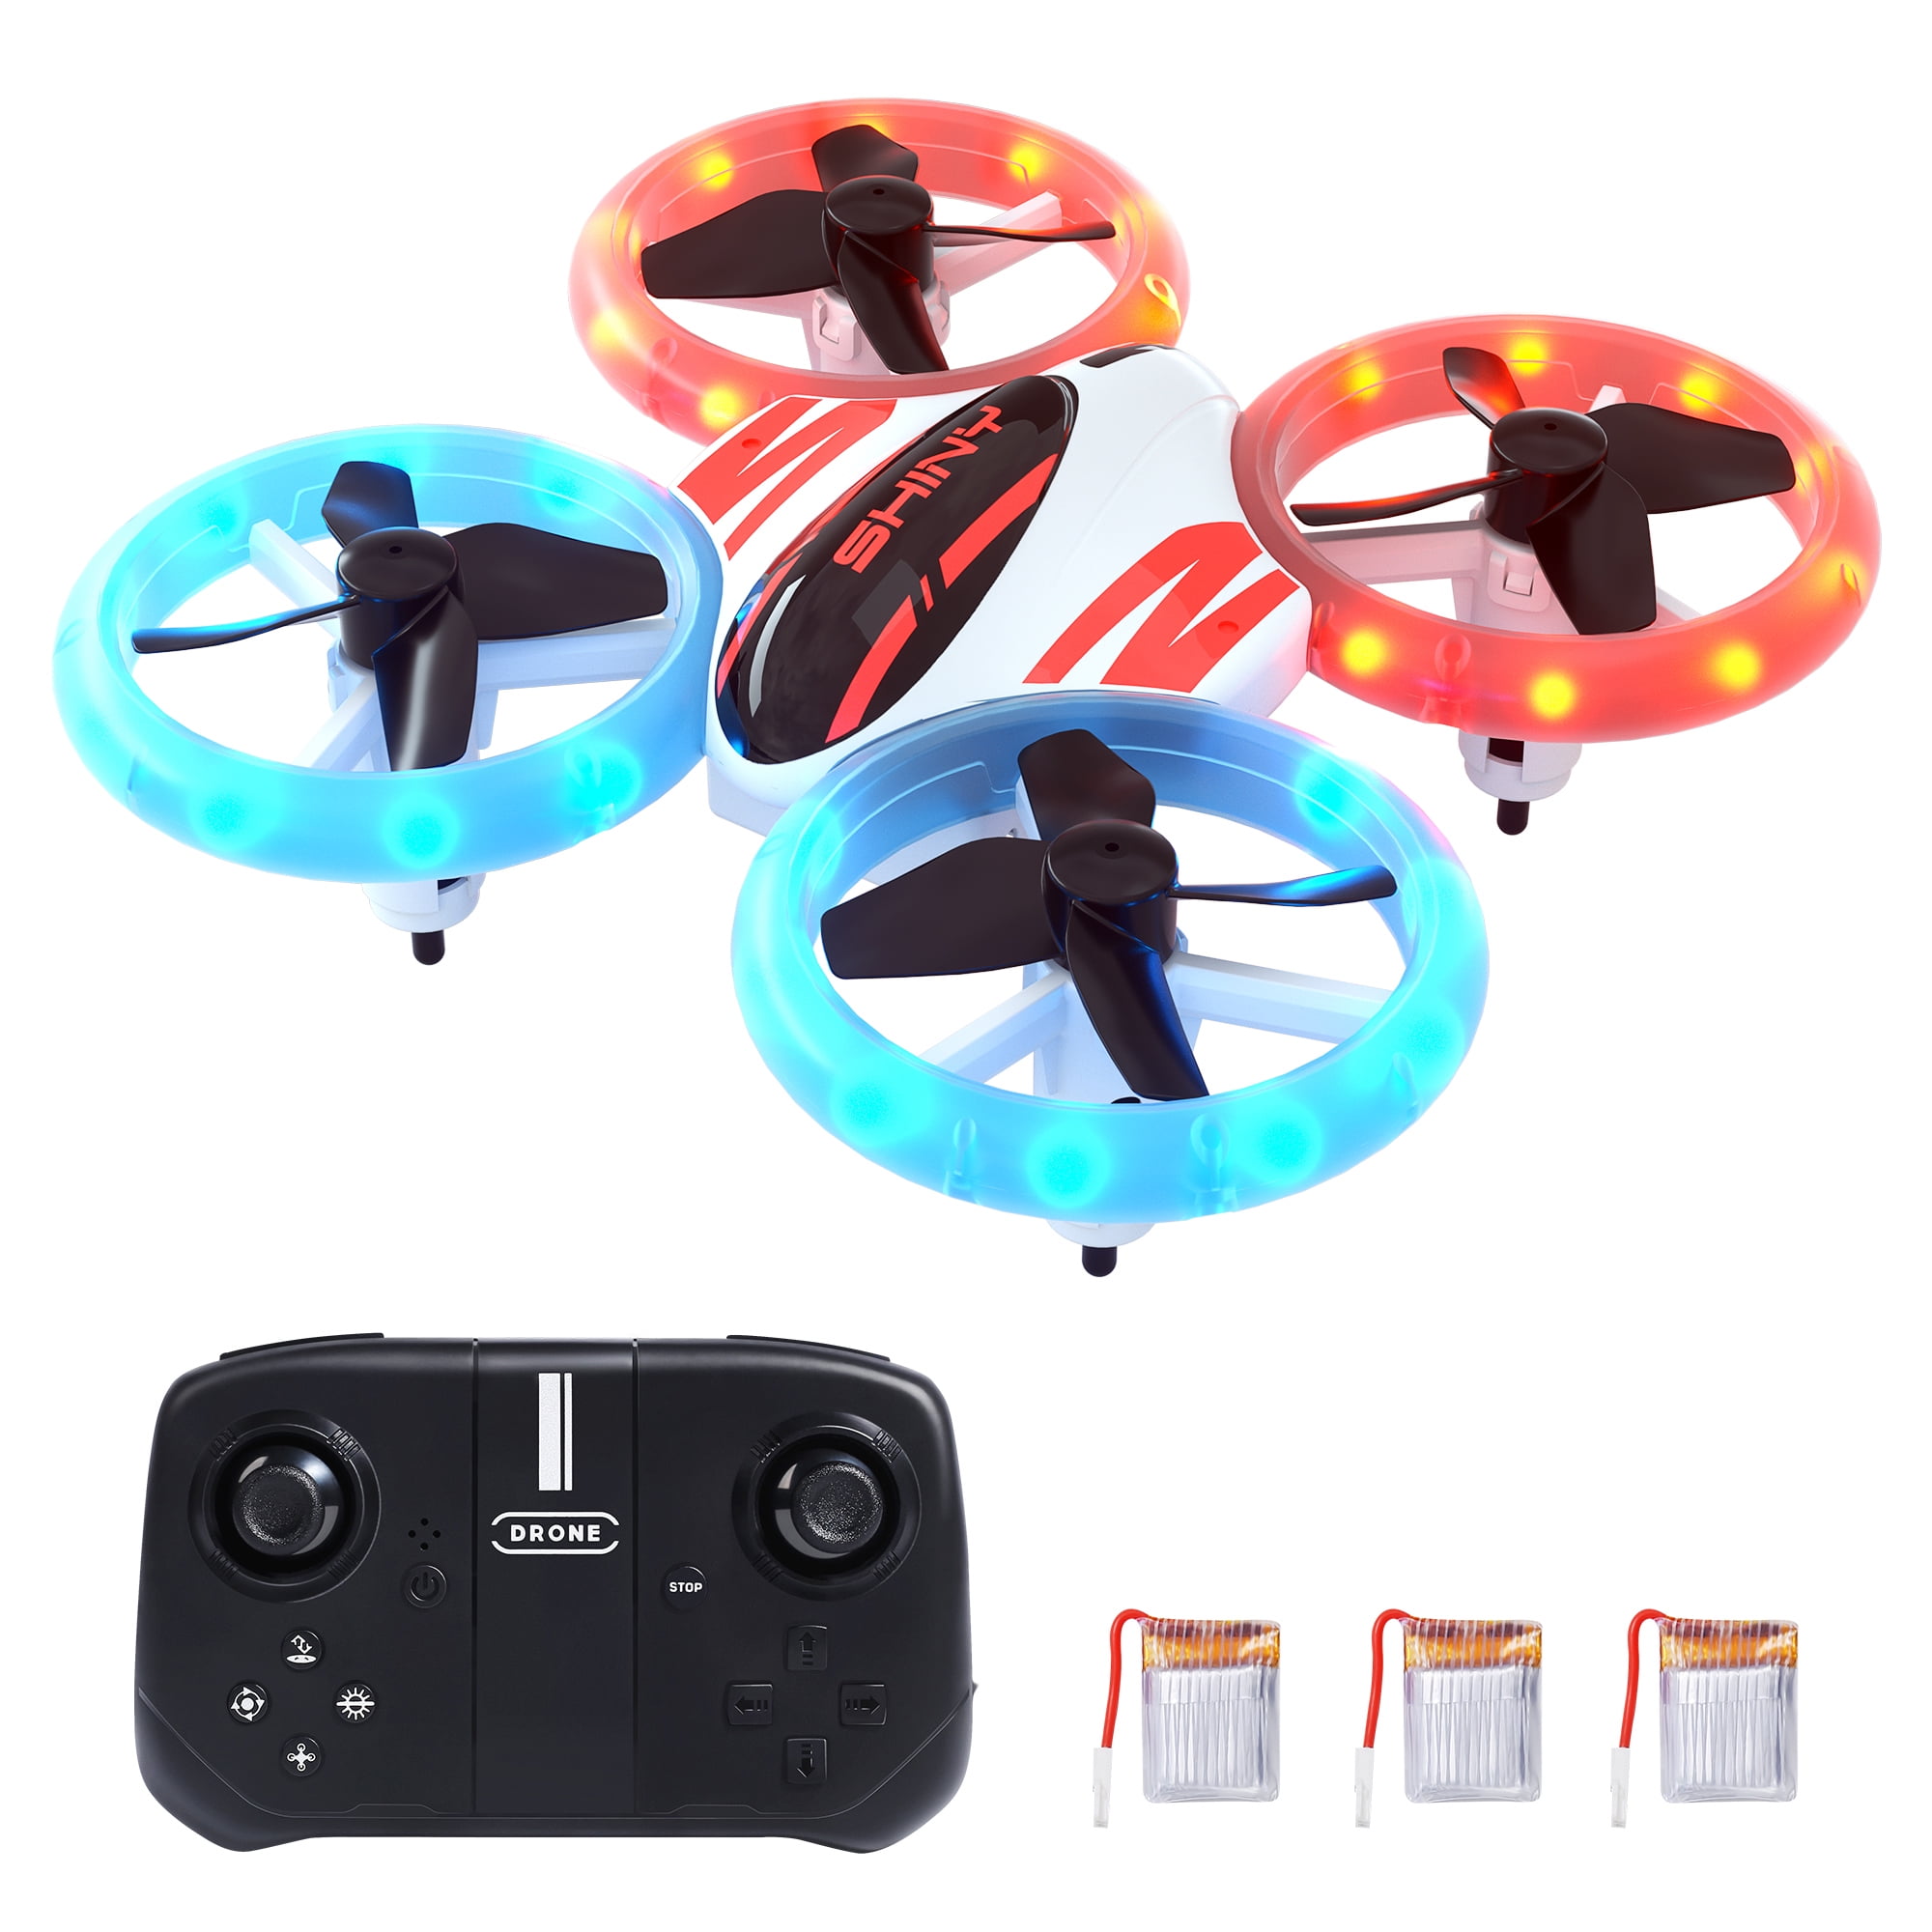 DEERC DC11 Mini Drone for Kids, RC Nano Quadcopter with LED Lights for  Beginners with Altitude Hold, Demo Mode, 3 Batteries, Green